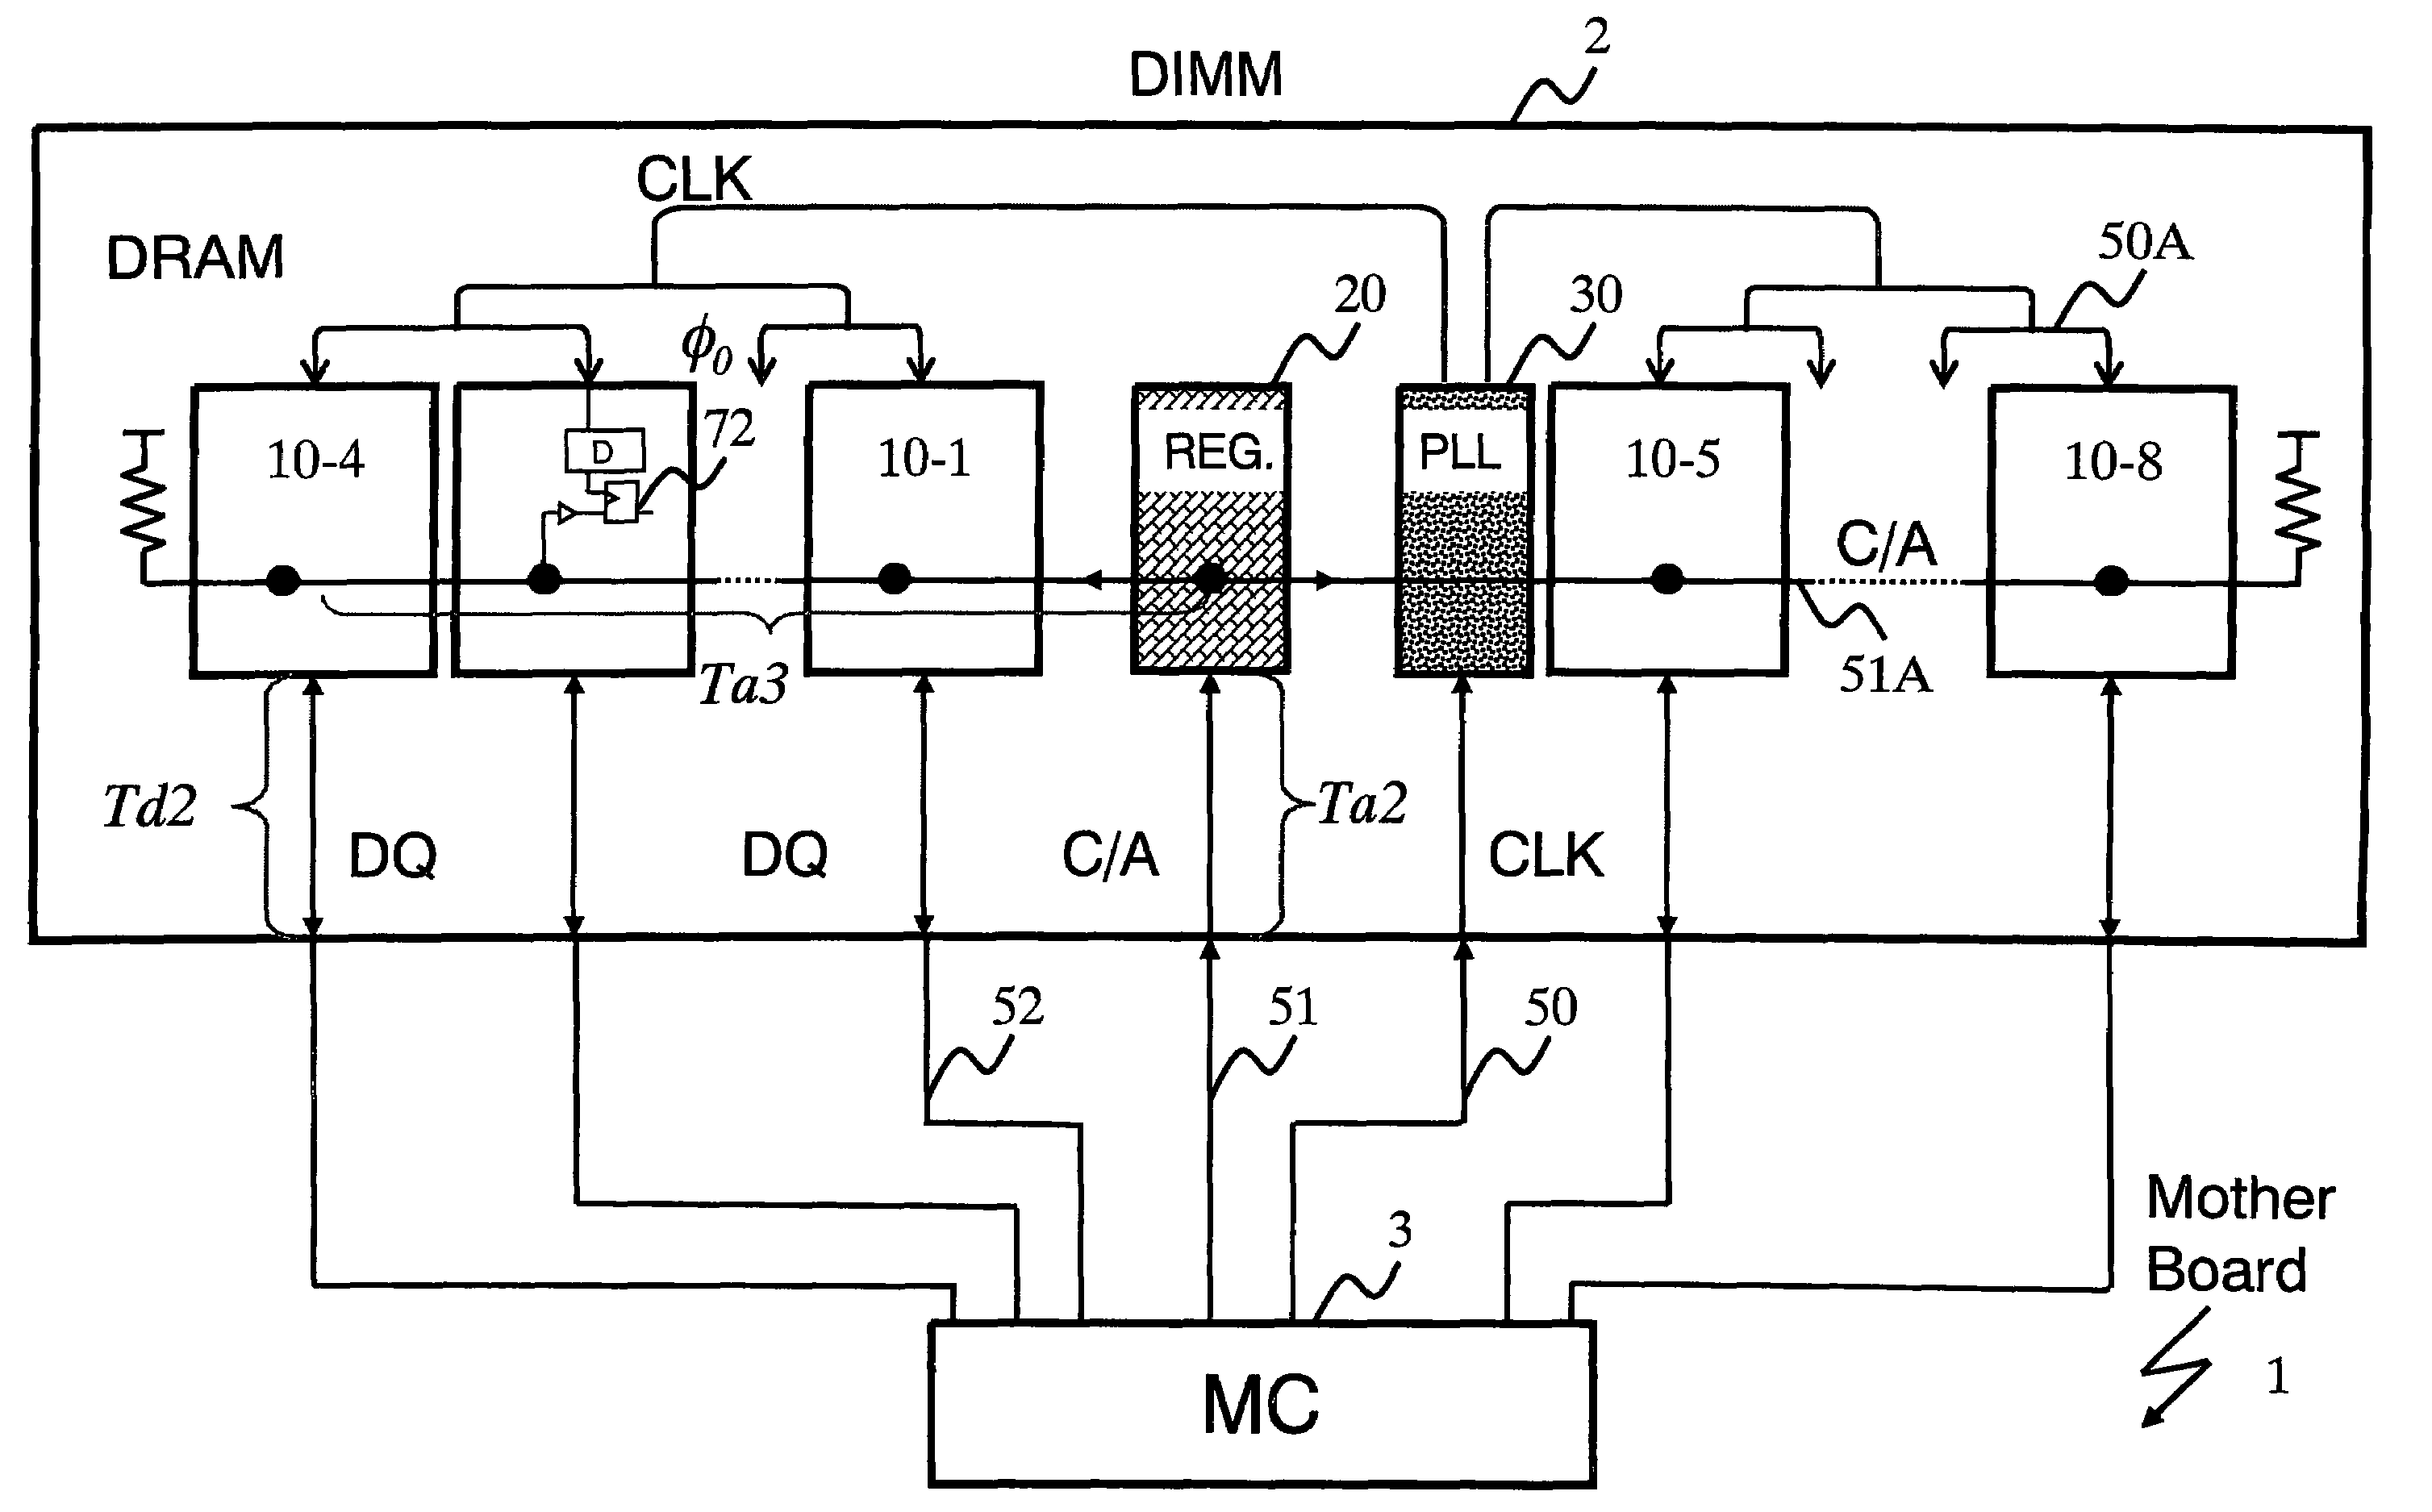 Semiconductor memory module, memory system, circuit, semiconductor device, and DIMM